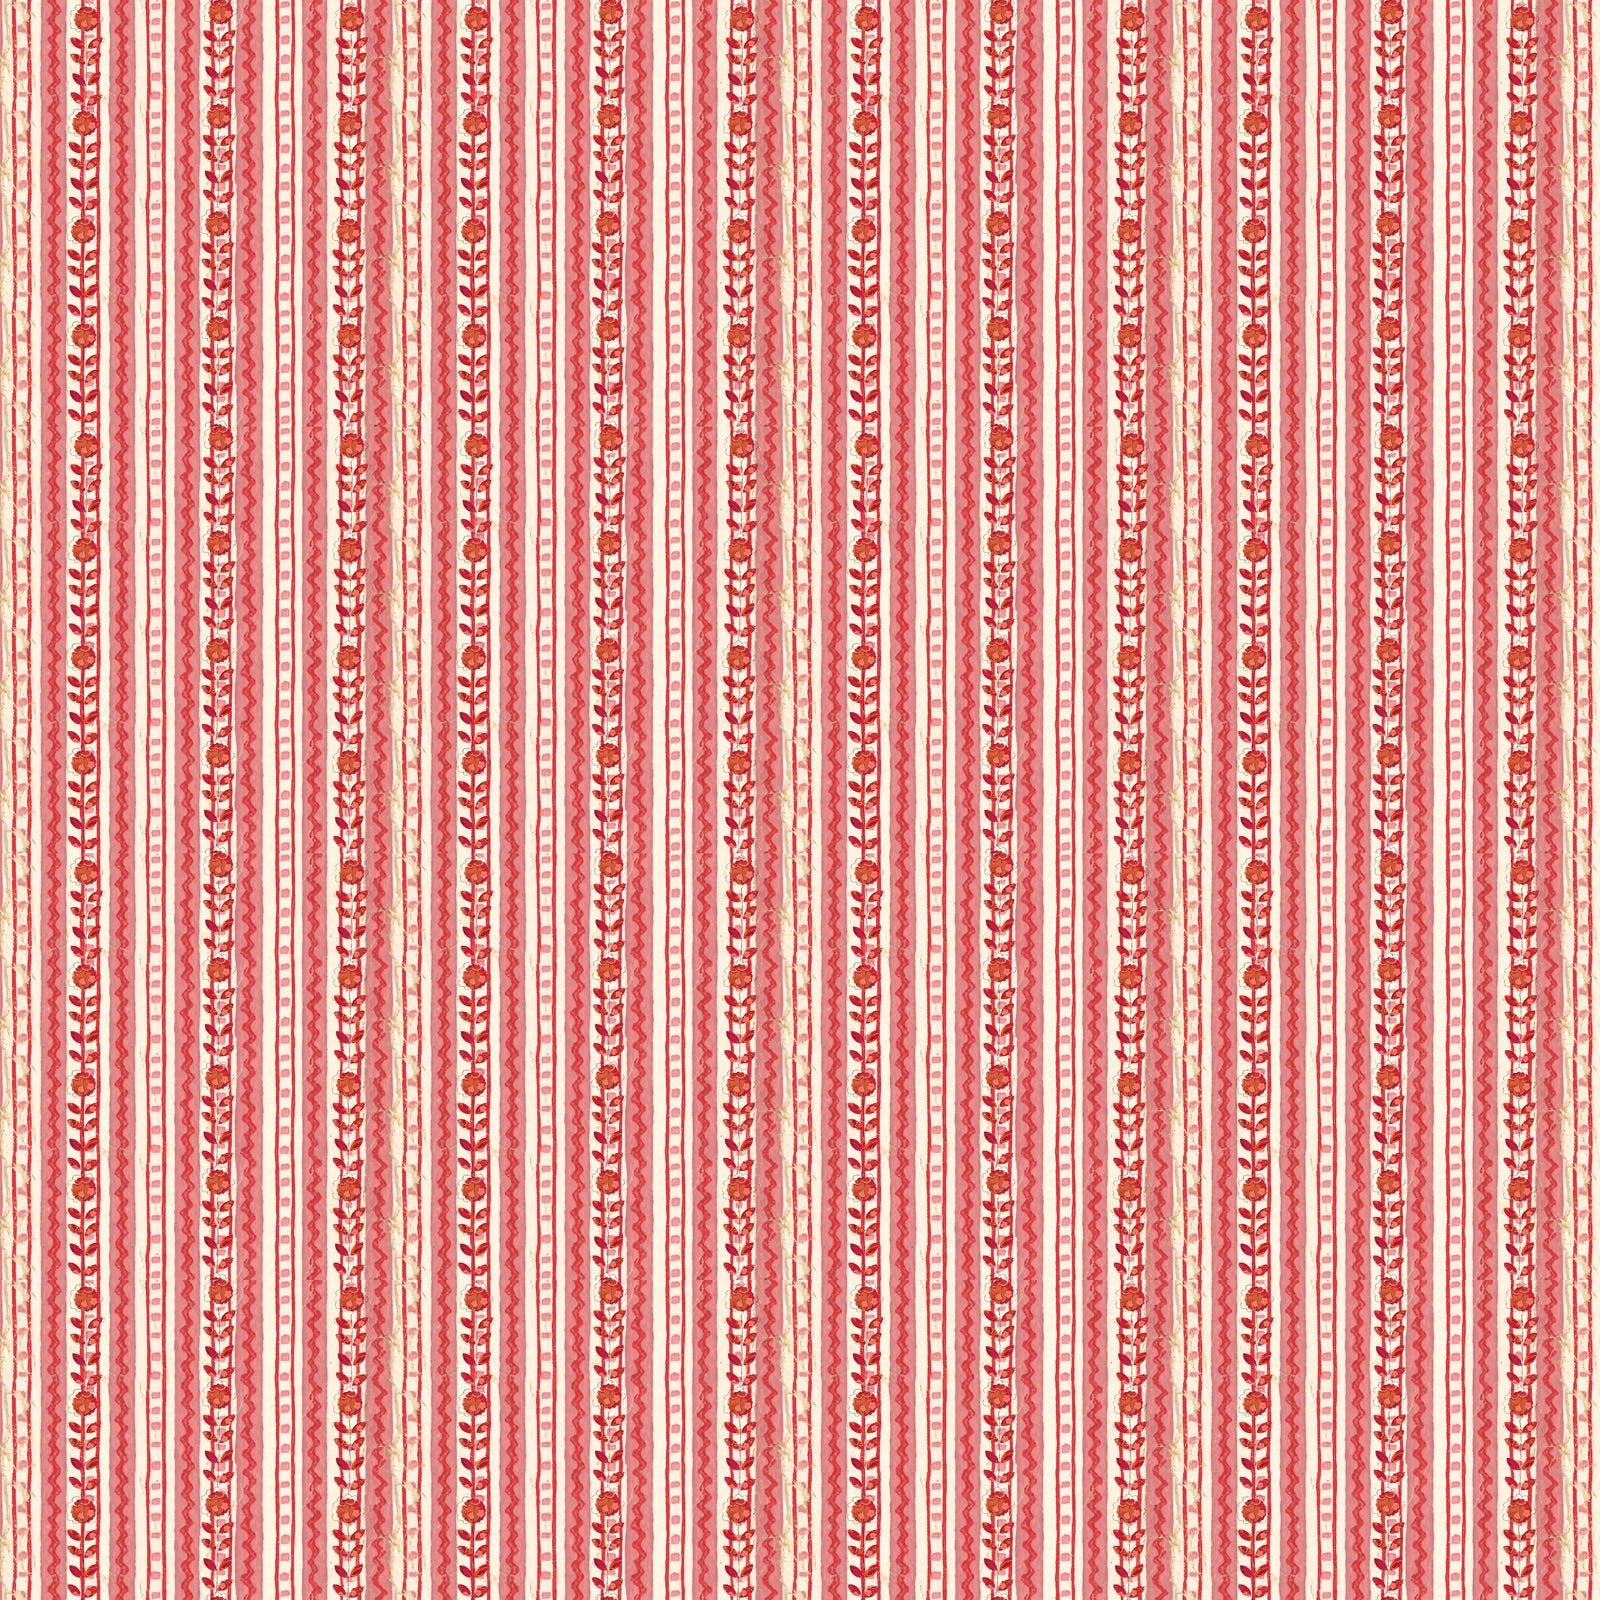 Garden of Light Be the Light Light 12997 20 Rose Tonal Stripe by Kelly Rae Roberts for Benartex Sold by the Half Yard